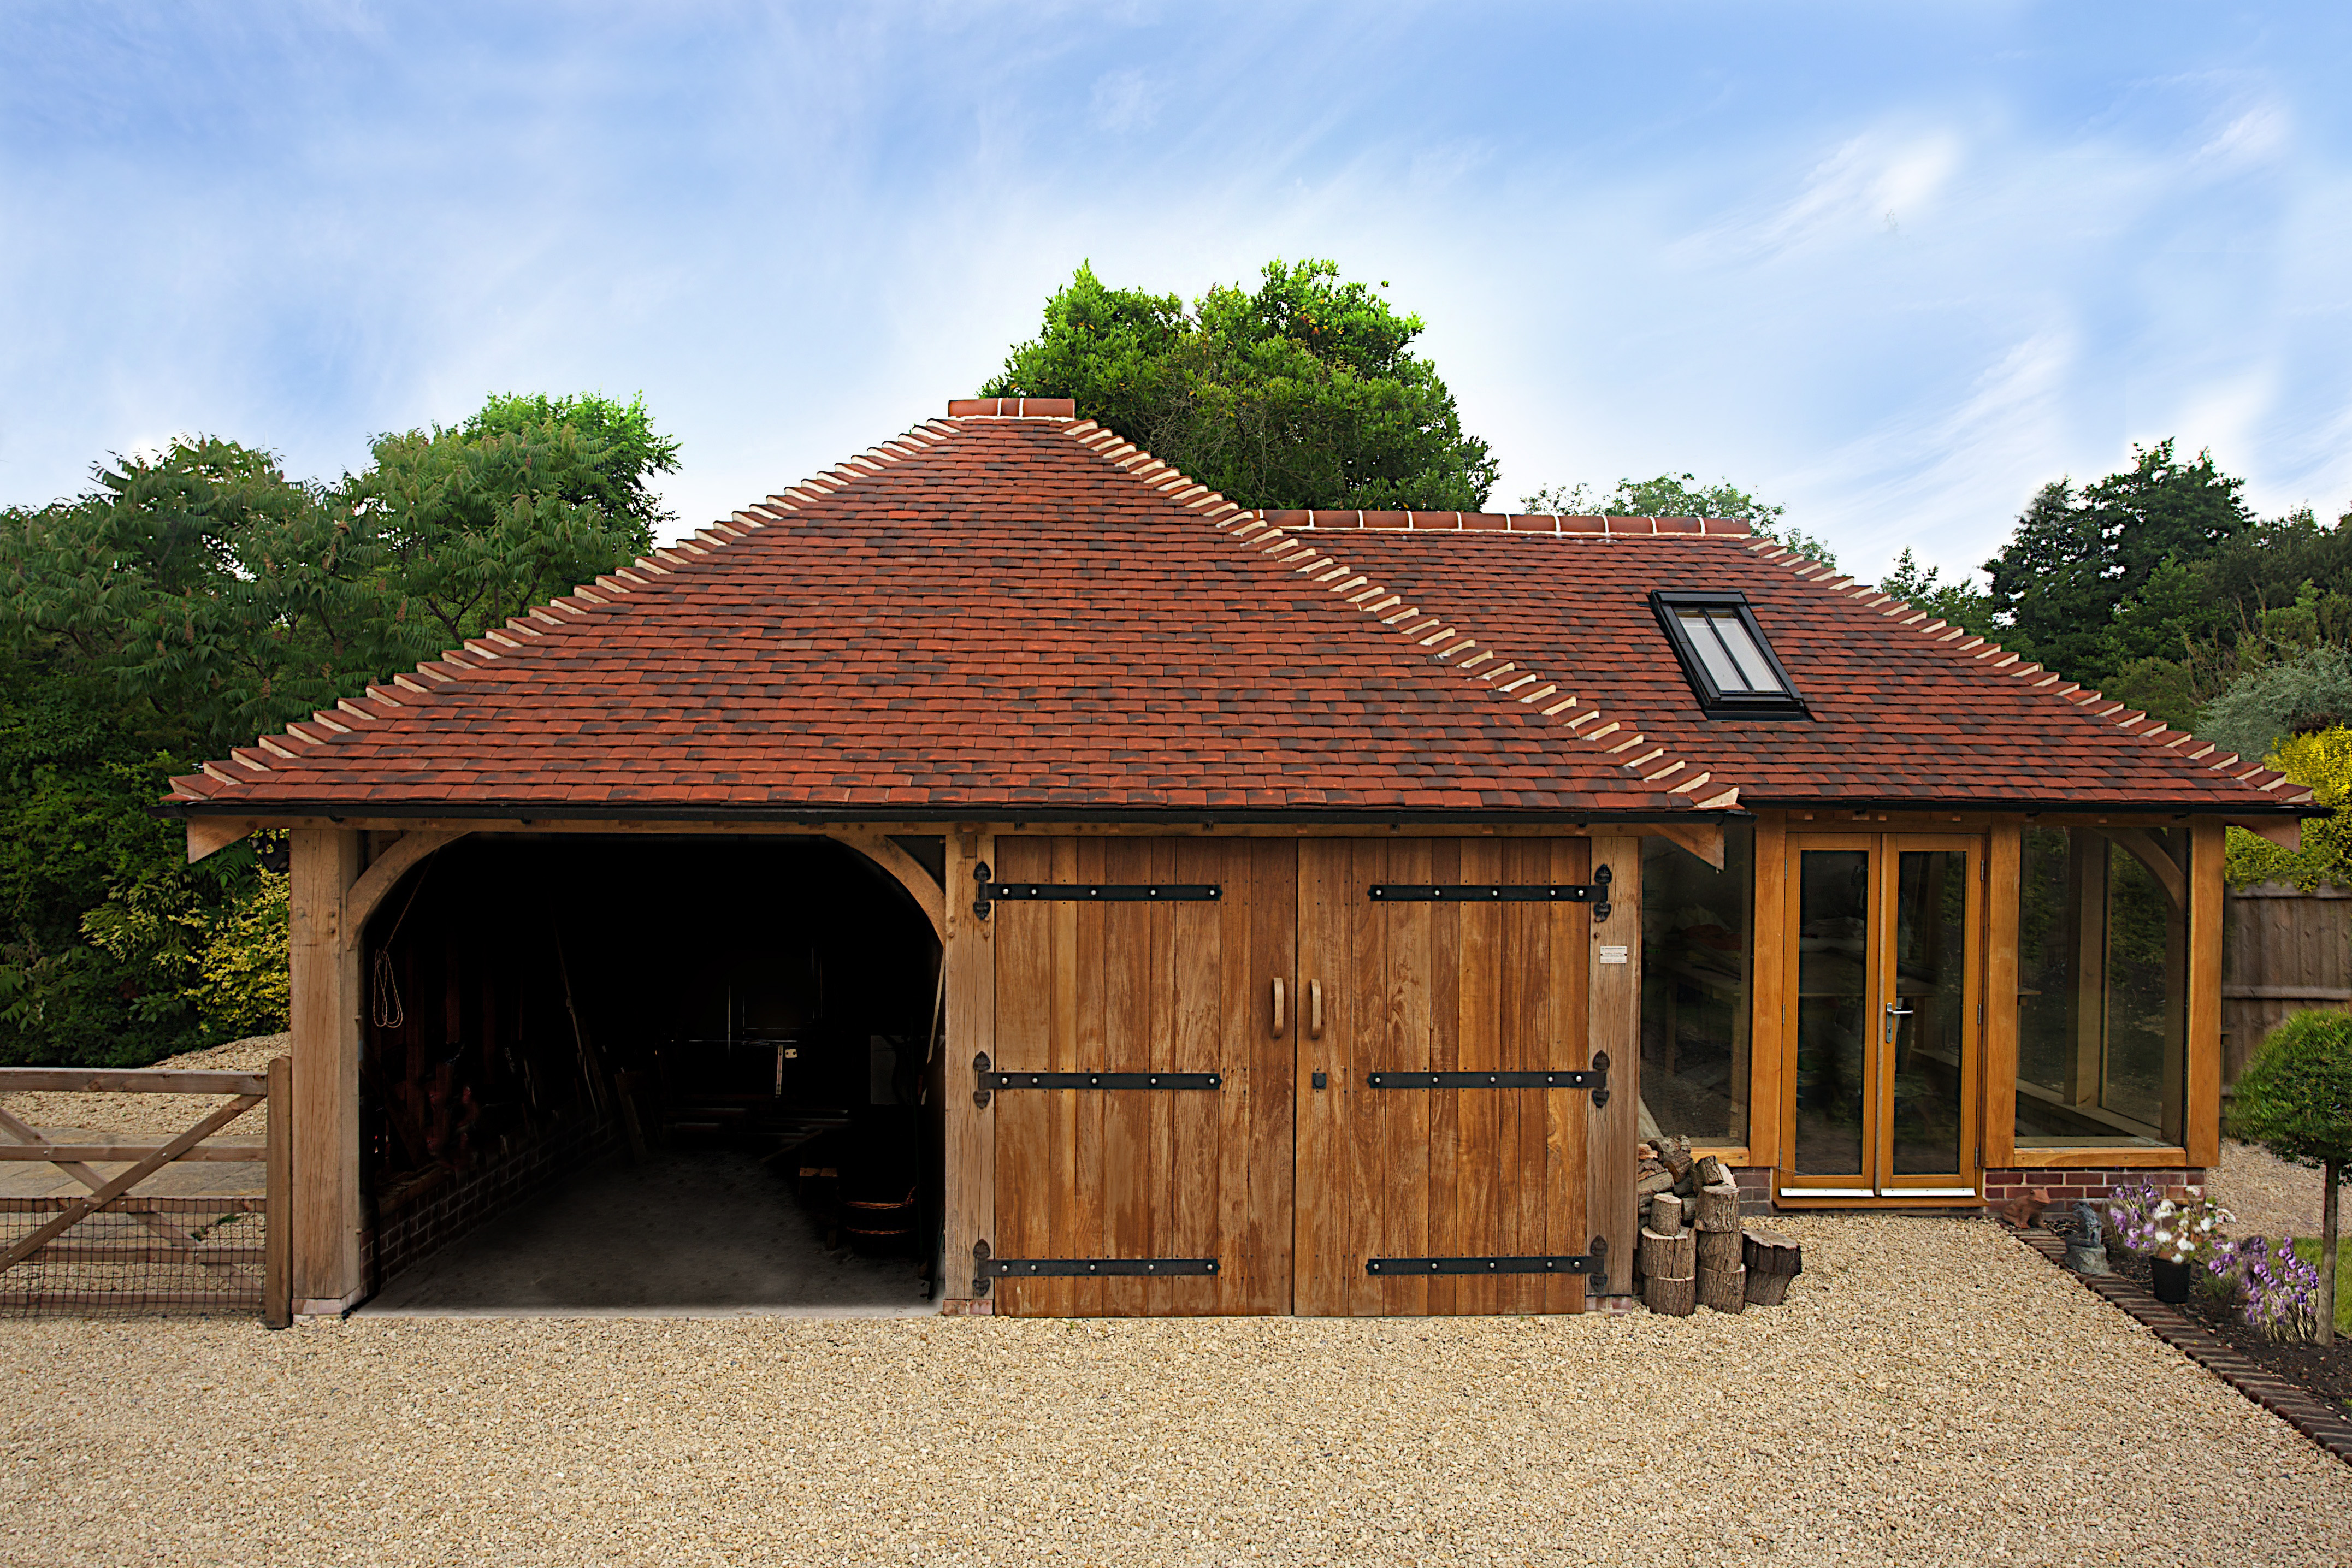 This multi-purpose outbuilding consists of a two-bay frame (K45) used as a garage and workshop area, and a bespoke frame with glazed elevations which is used as a craft studio.